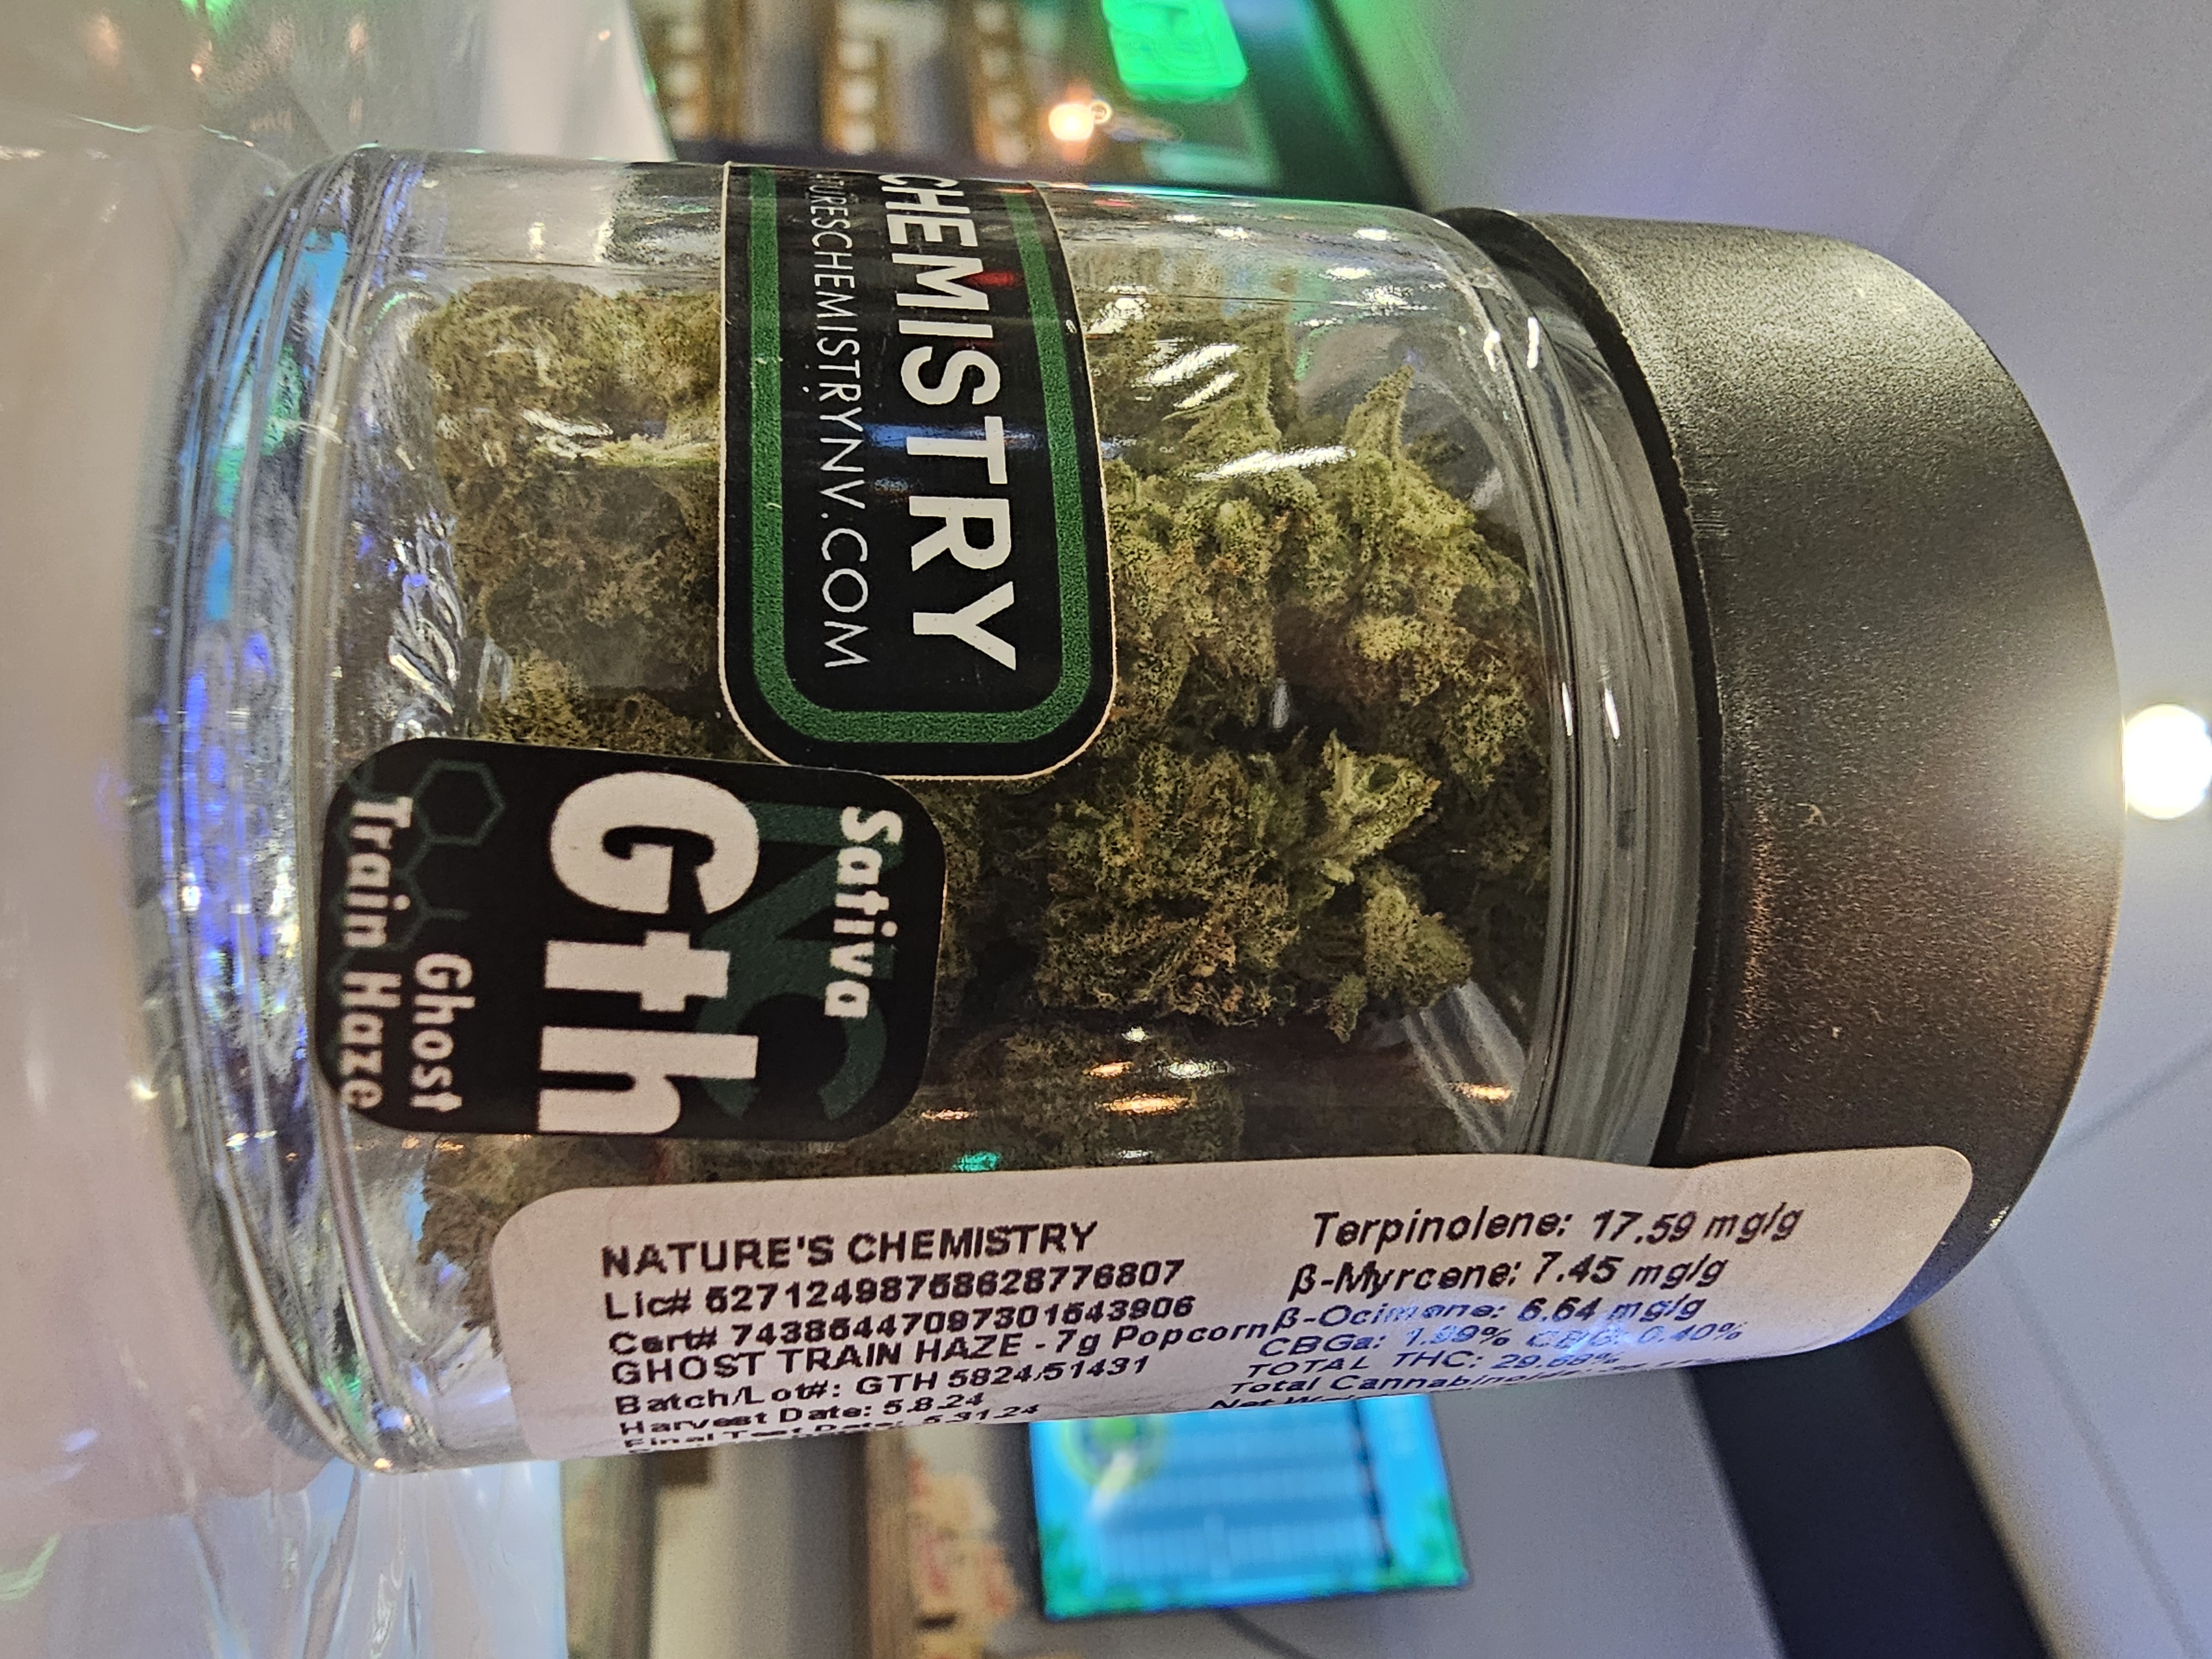 Ghost Train Haze by Nature's Chemistry